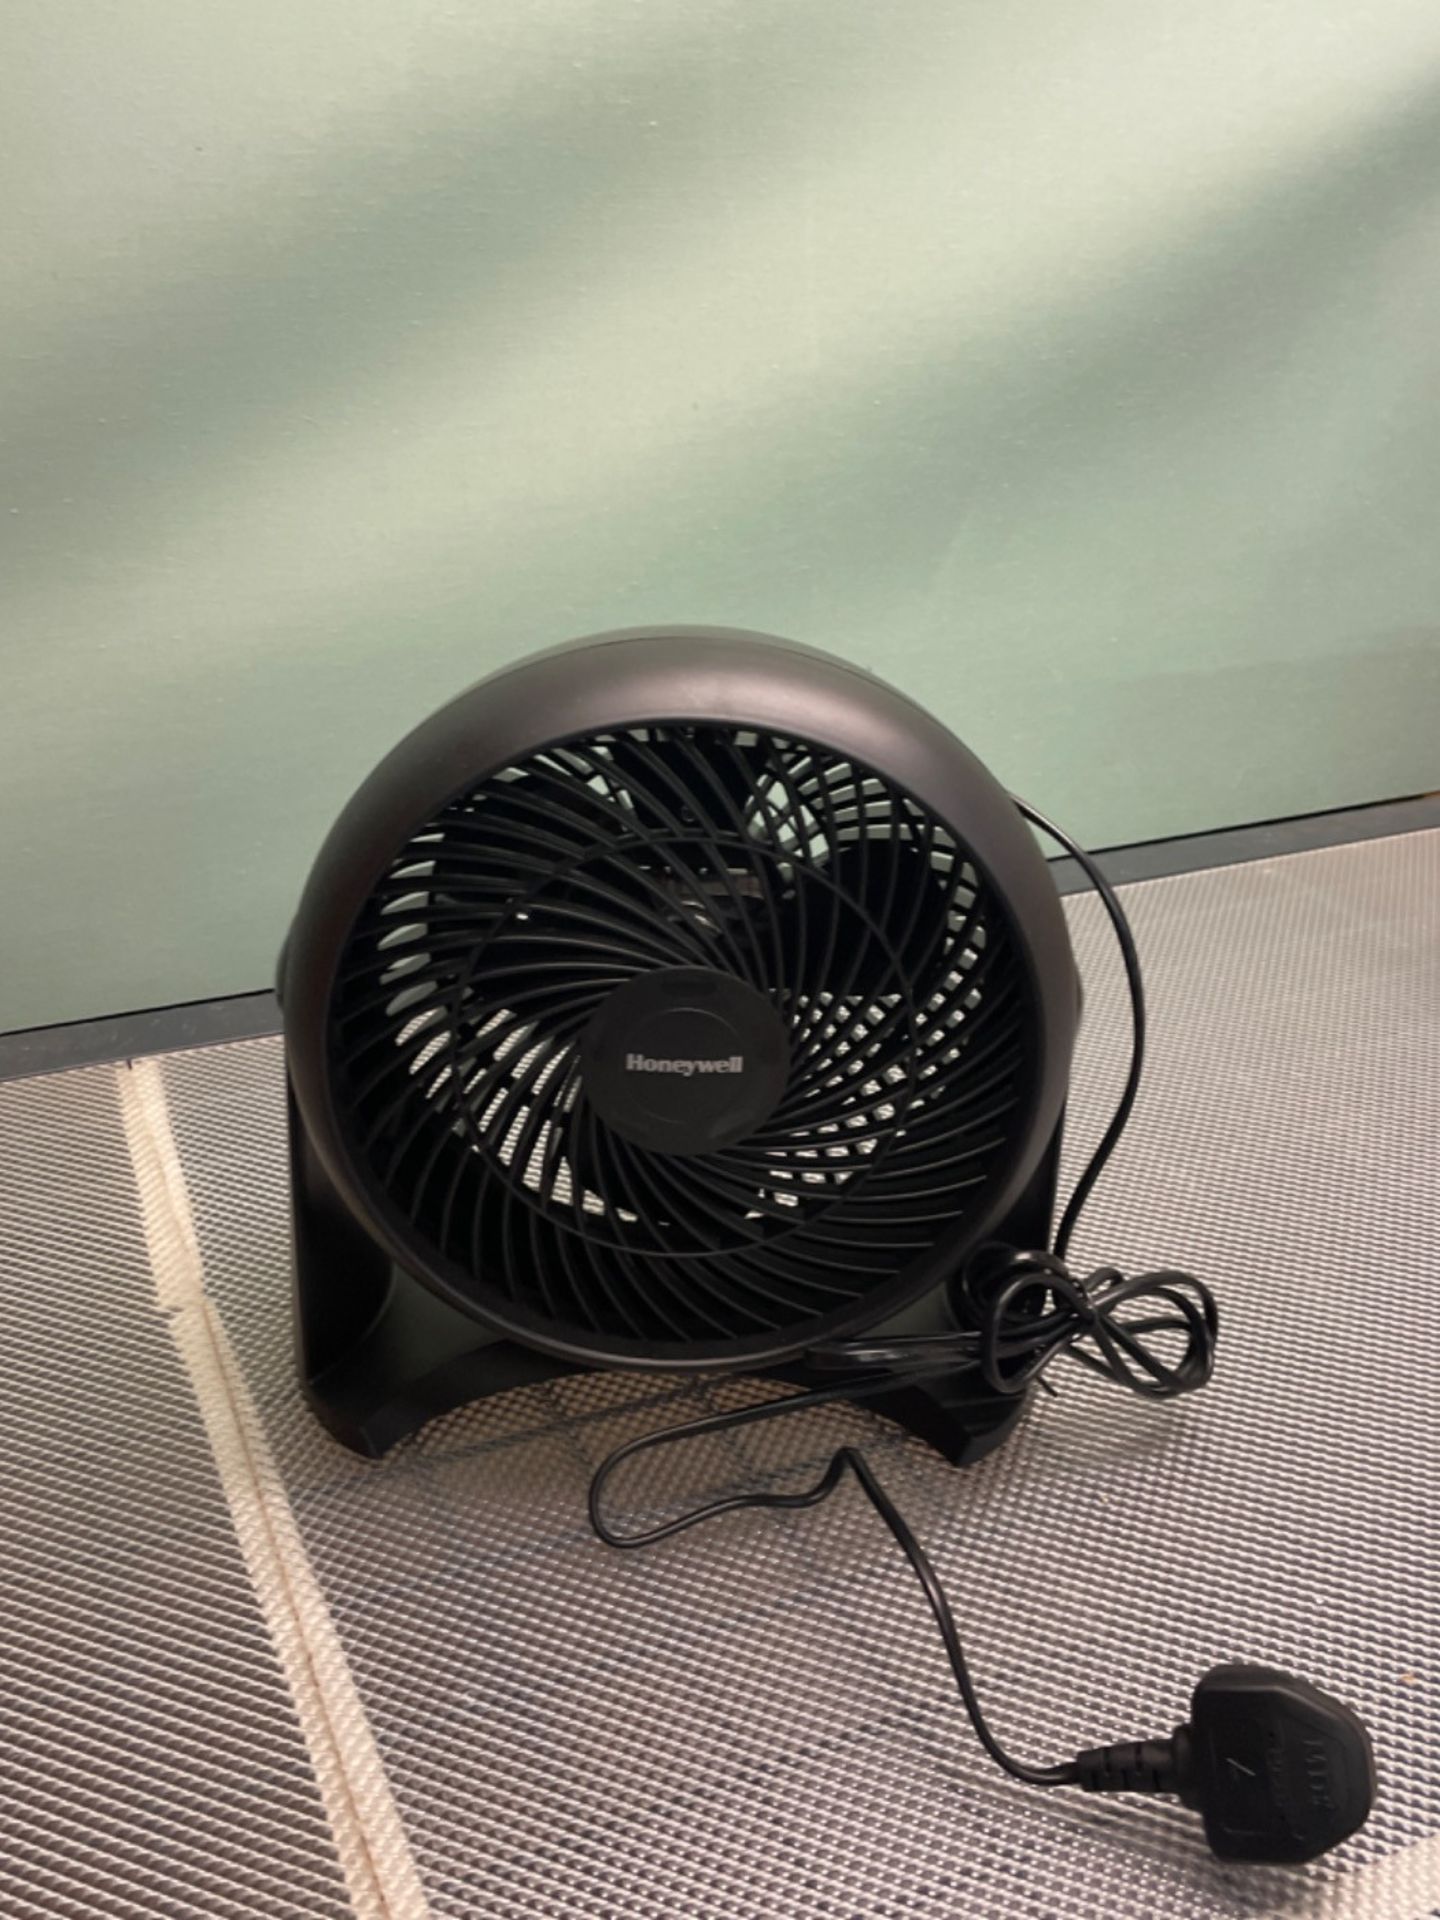 Honeywell Turboforce Power Fan (Quiet Operation Cooling, 90° Variable Tilt, 3 Speed Settings,... - Image 2 of 3